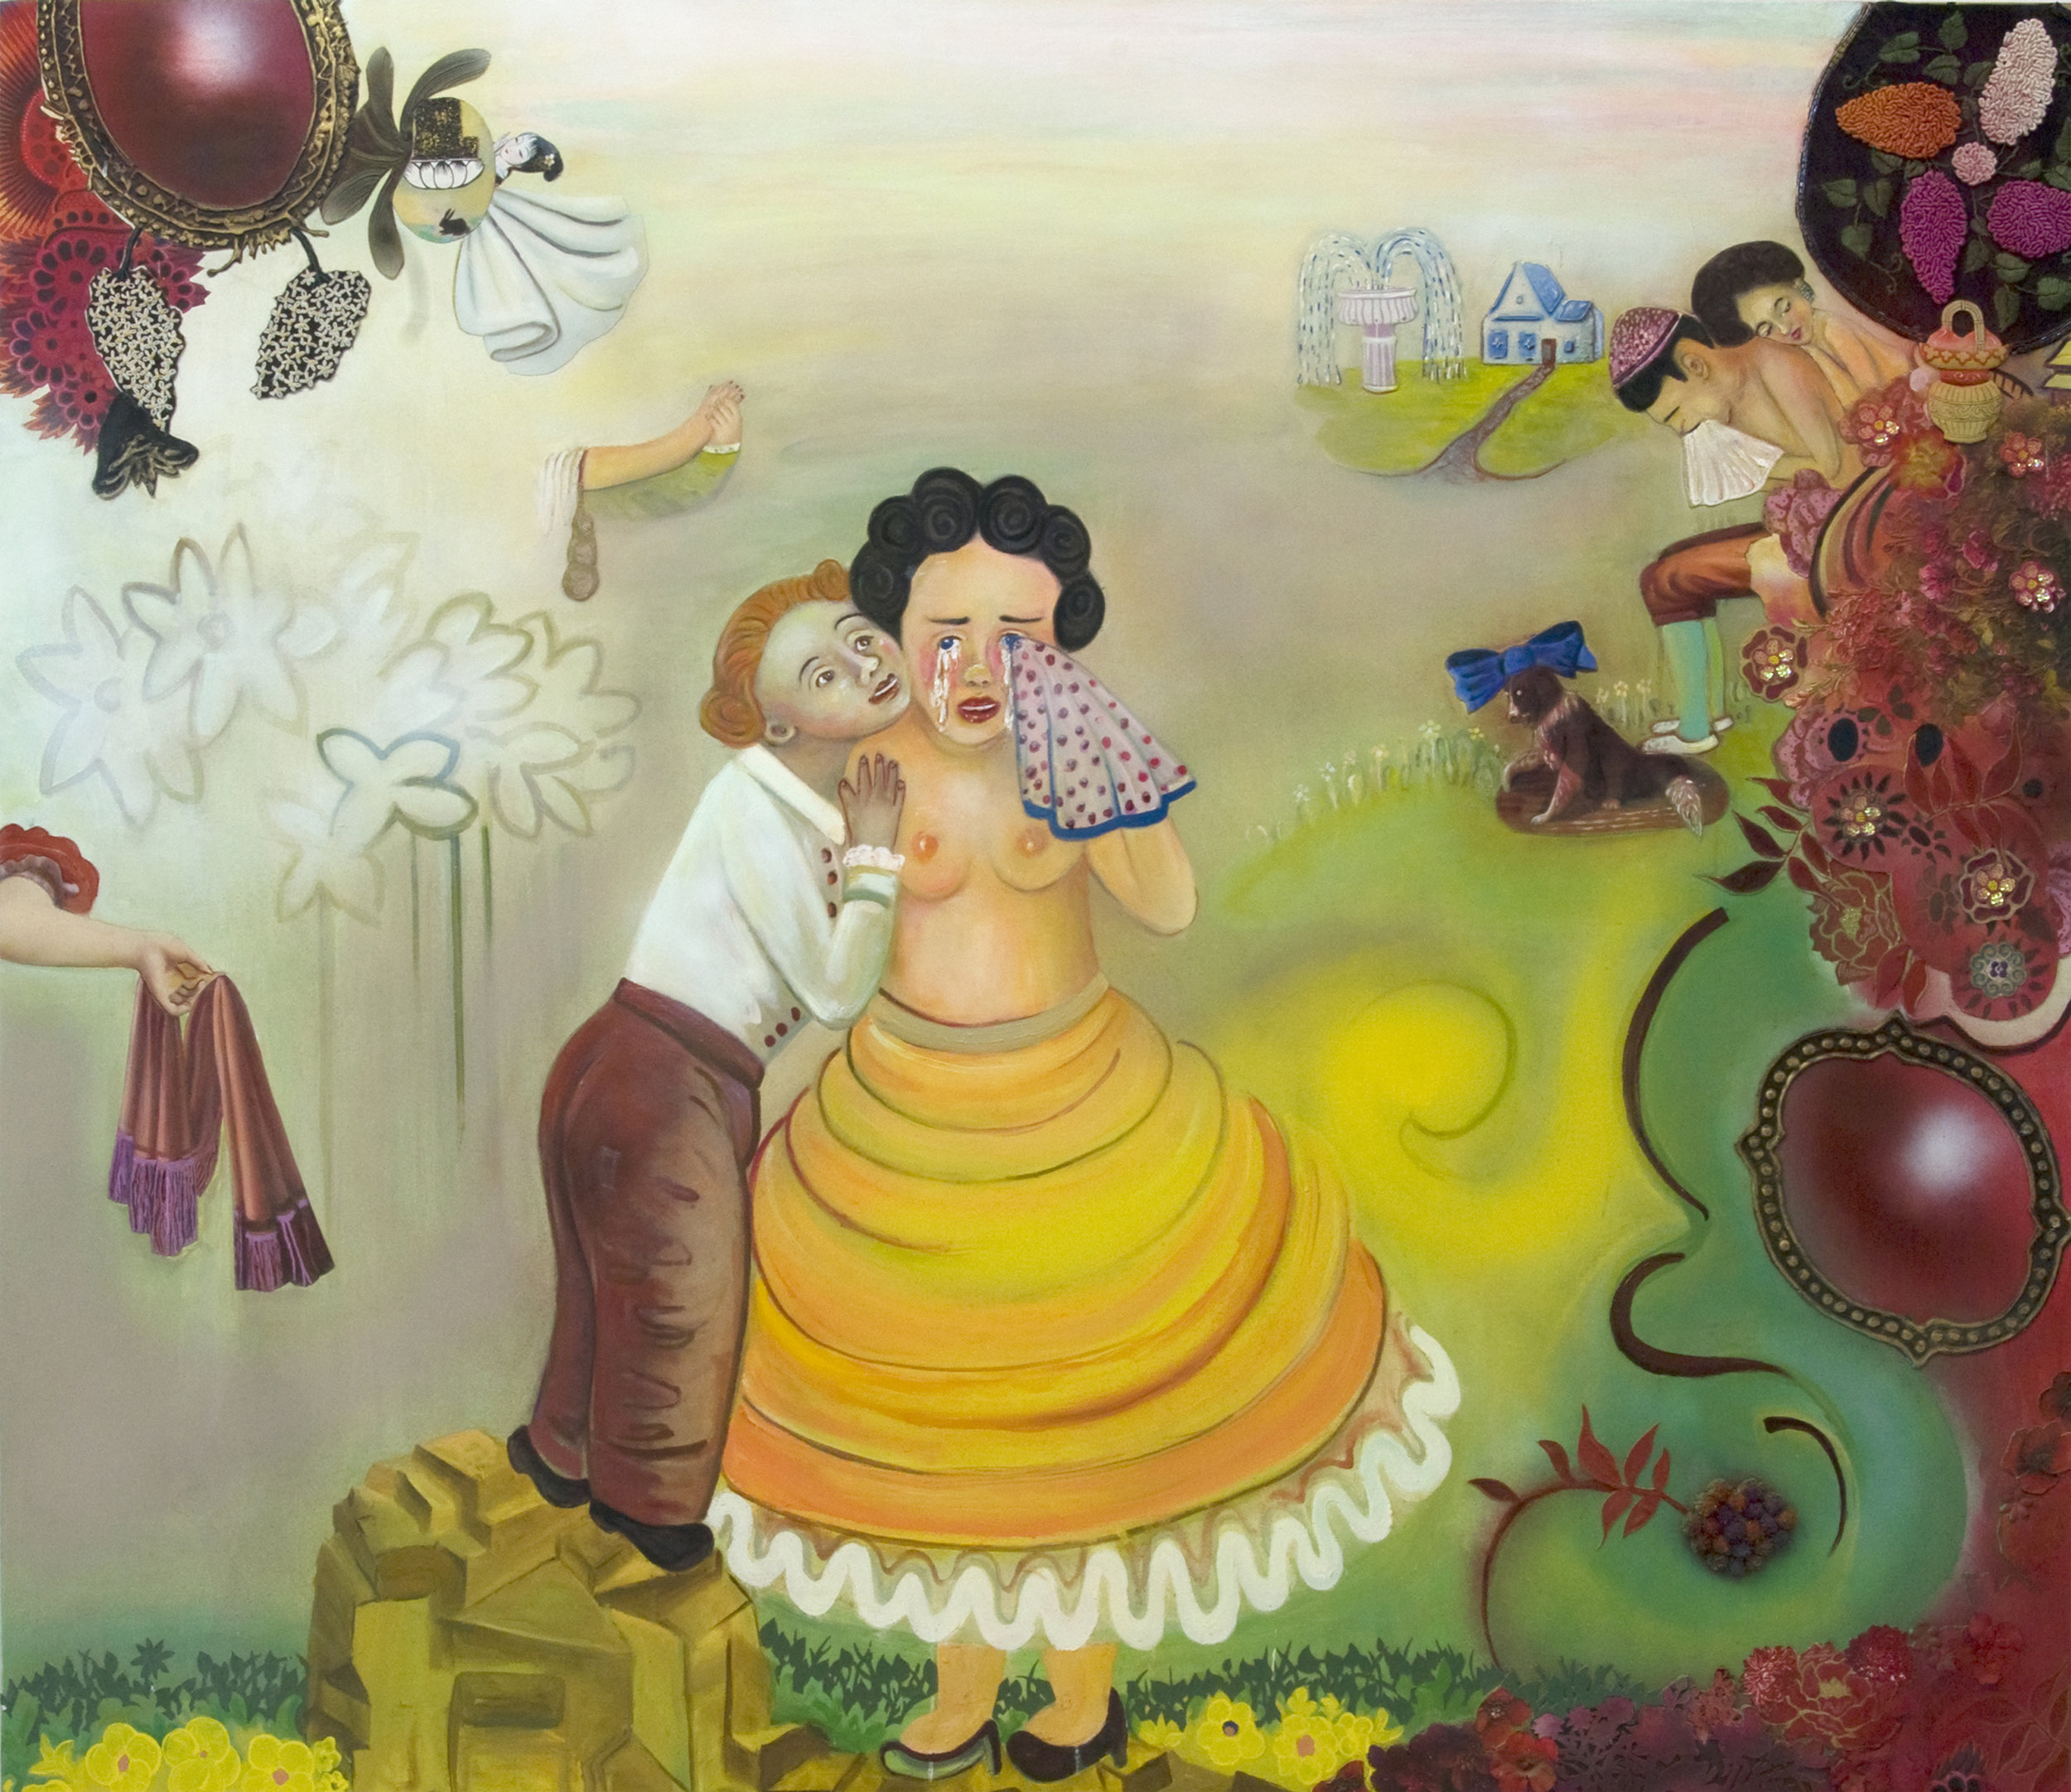 The Secret Life of People Who Care, 60" × 70", mixed media and oil on canvas, 2010